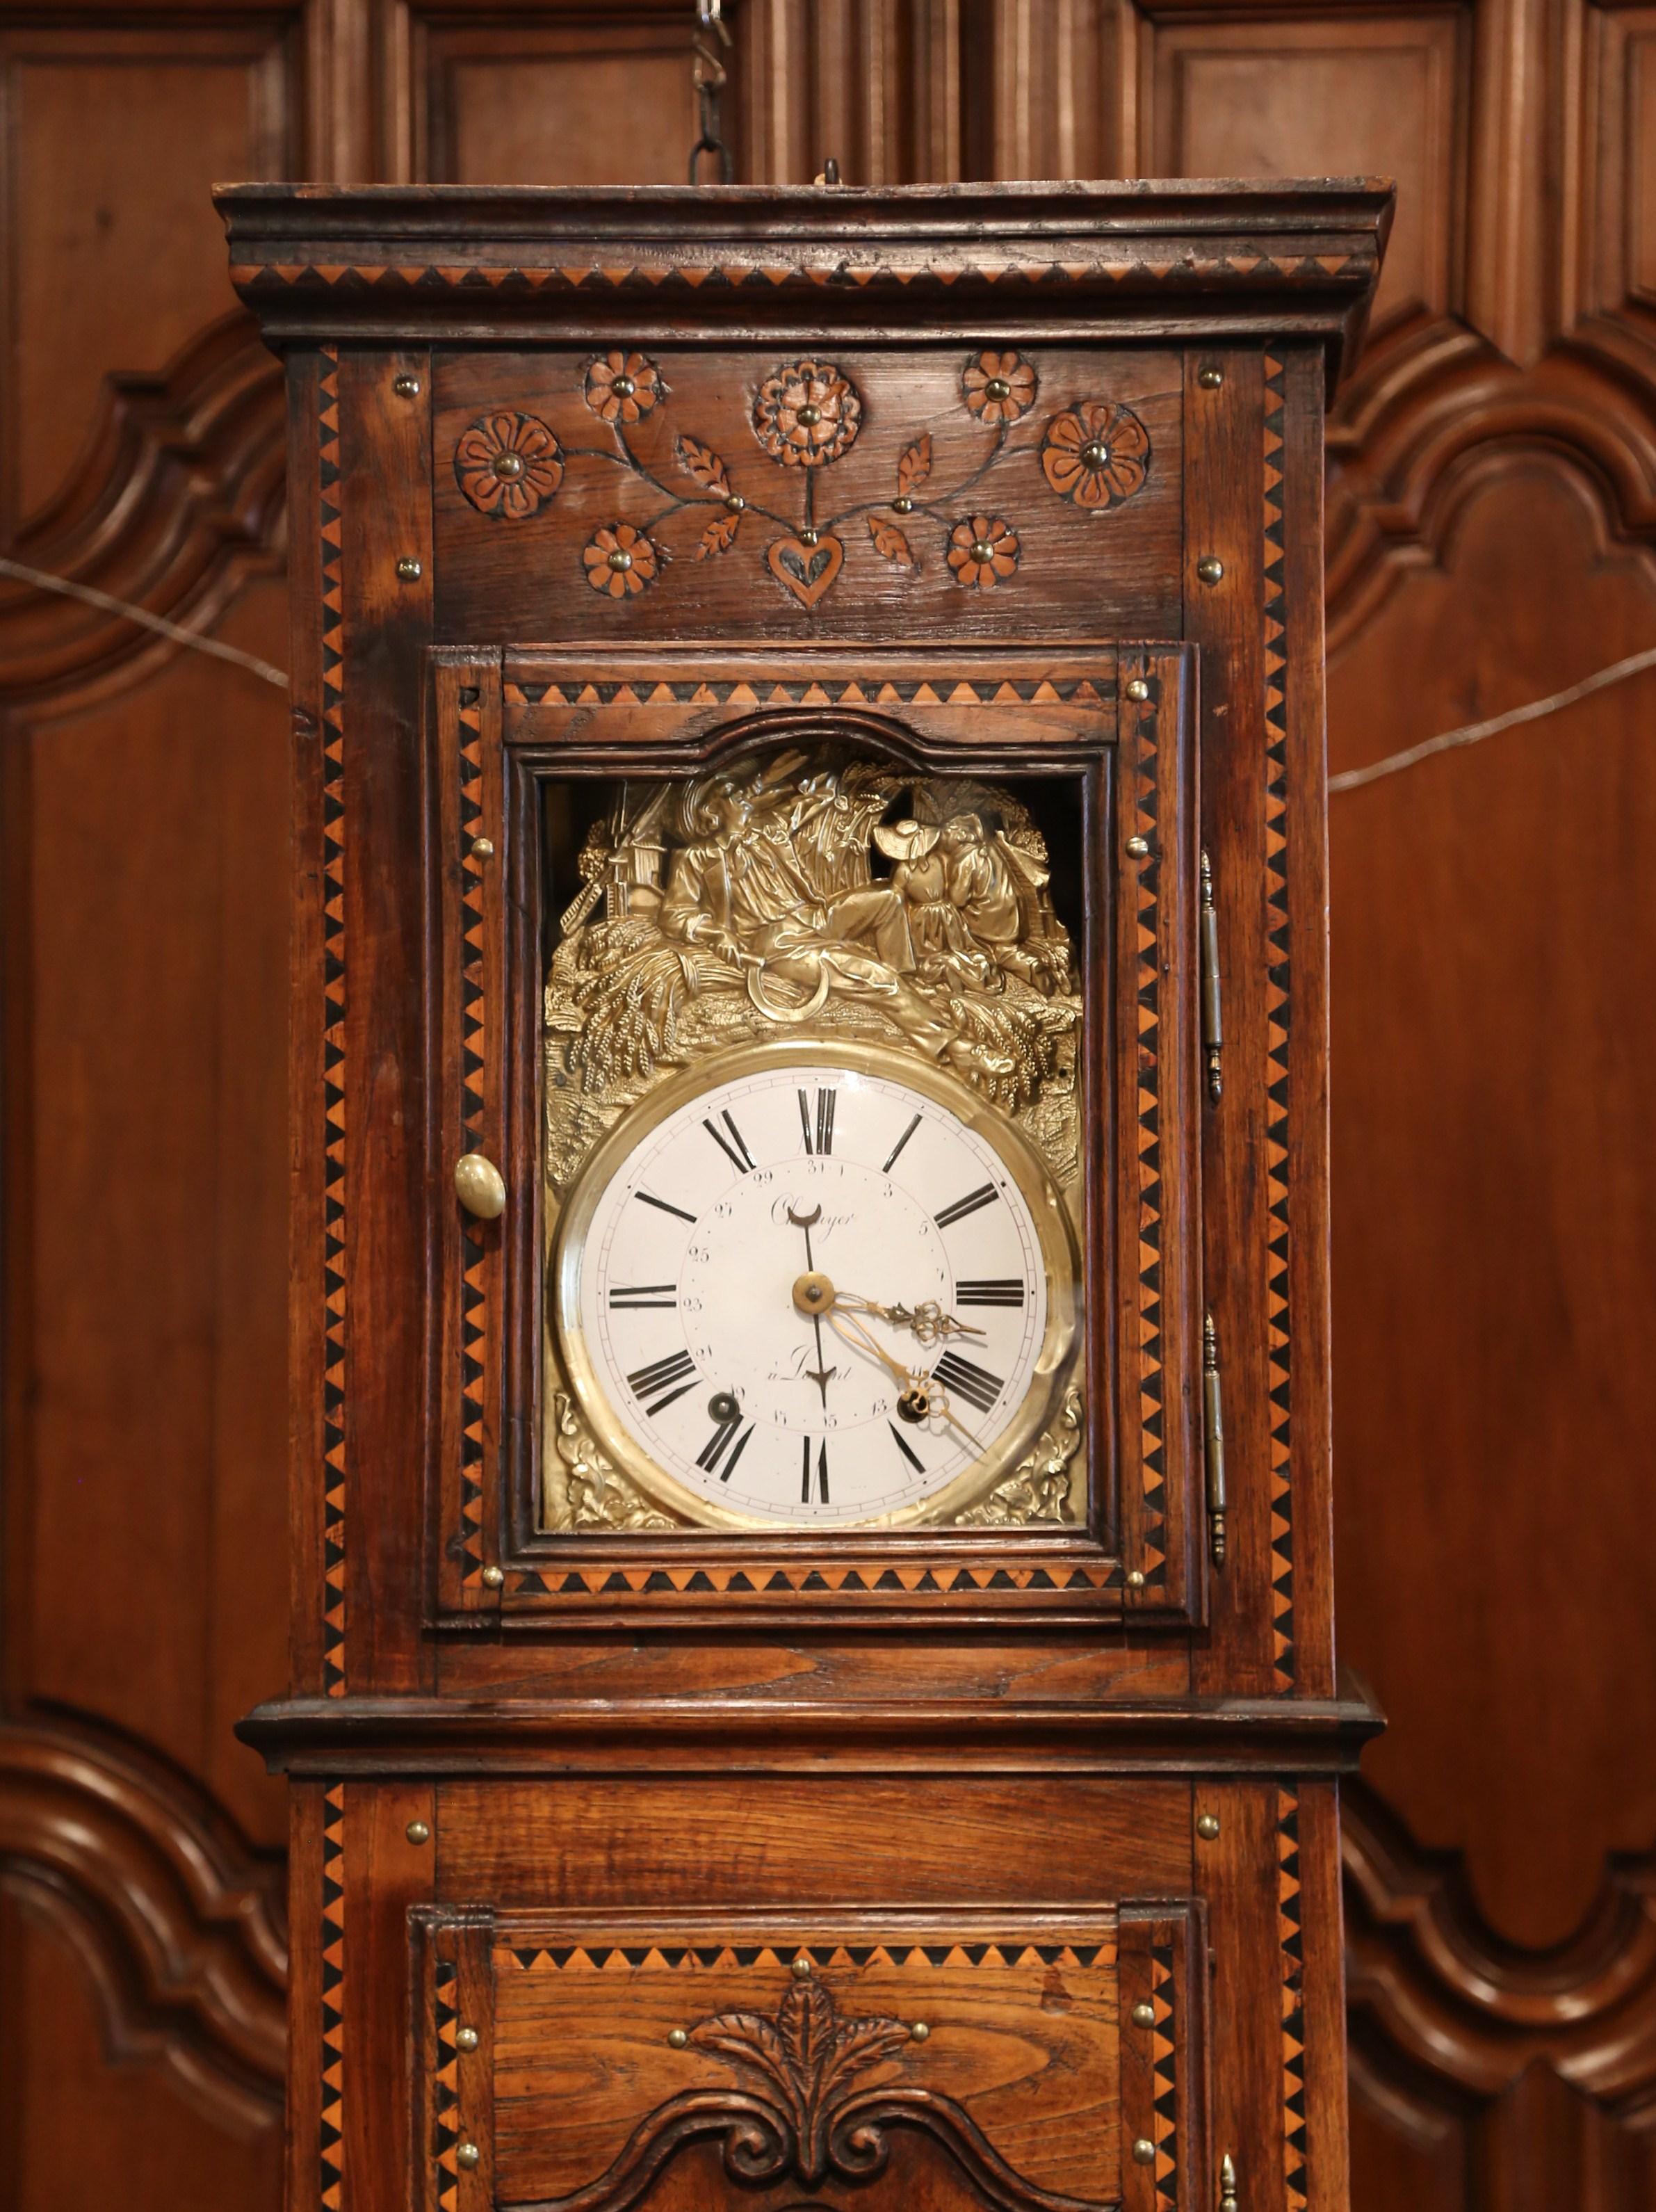 Bring additional life to a breakfast room with this antique long case clock. Crafted in Lorient (the west coast of Brittany), France circa 1780, this fruit wood clock features inlay floral and leaf decor on the facade. The timepiece is further